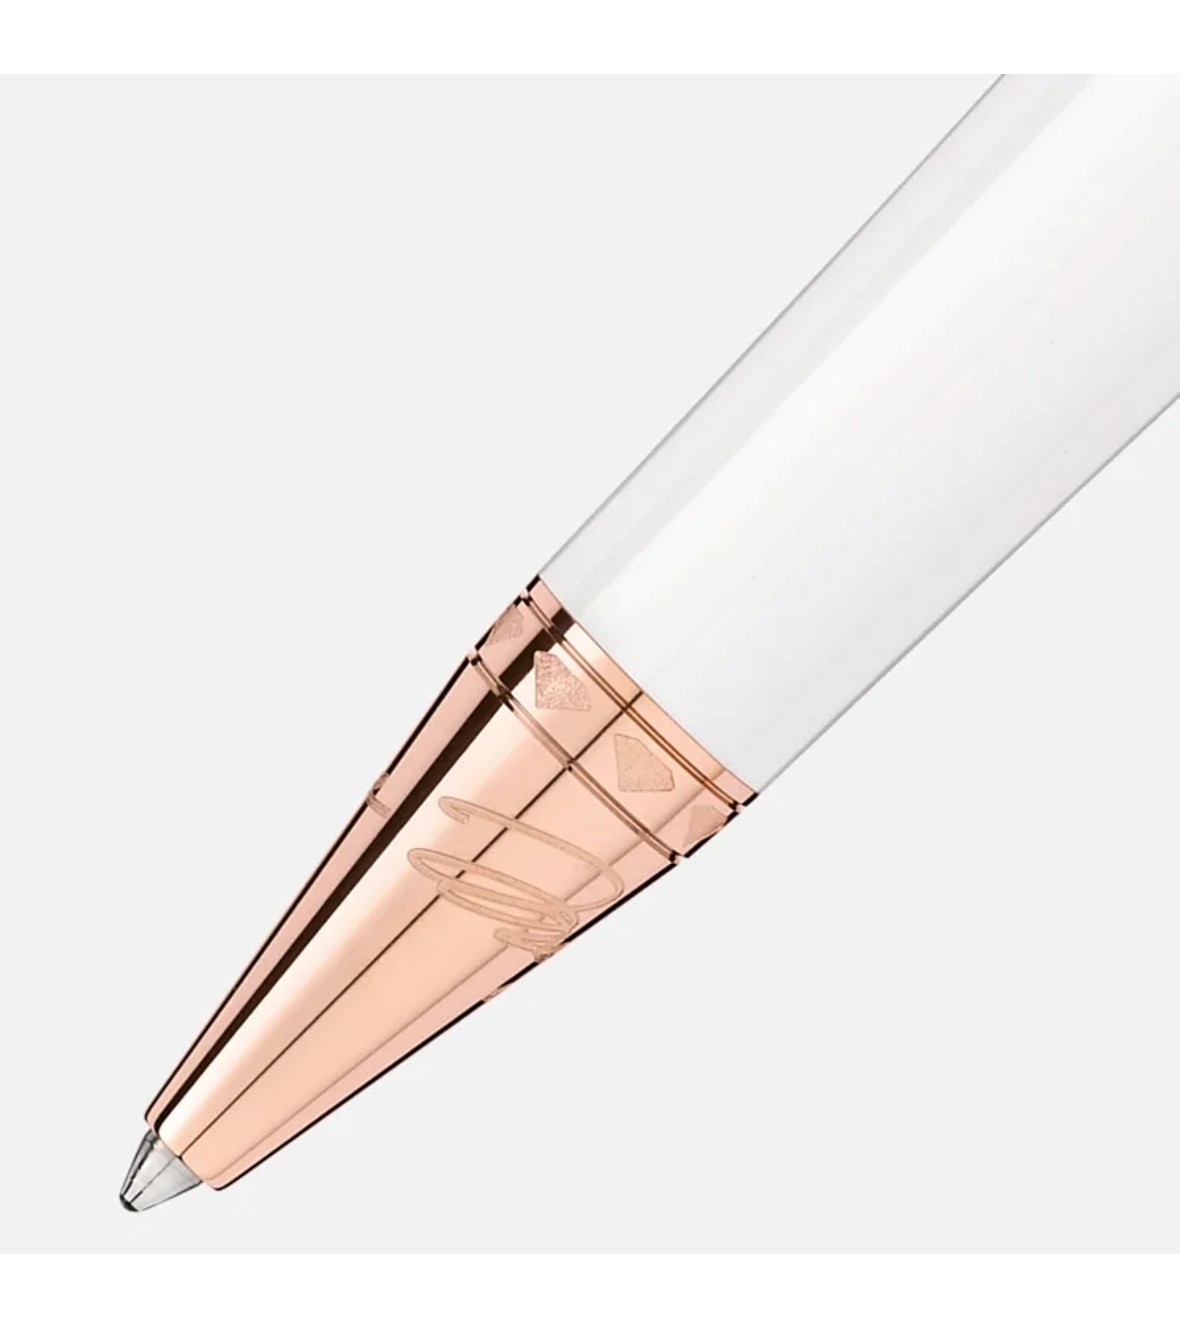 Montblanc Muses Marilyn Monroe Ballpoint Pen - Special Edition